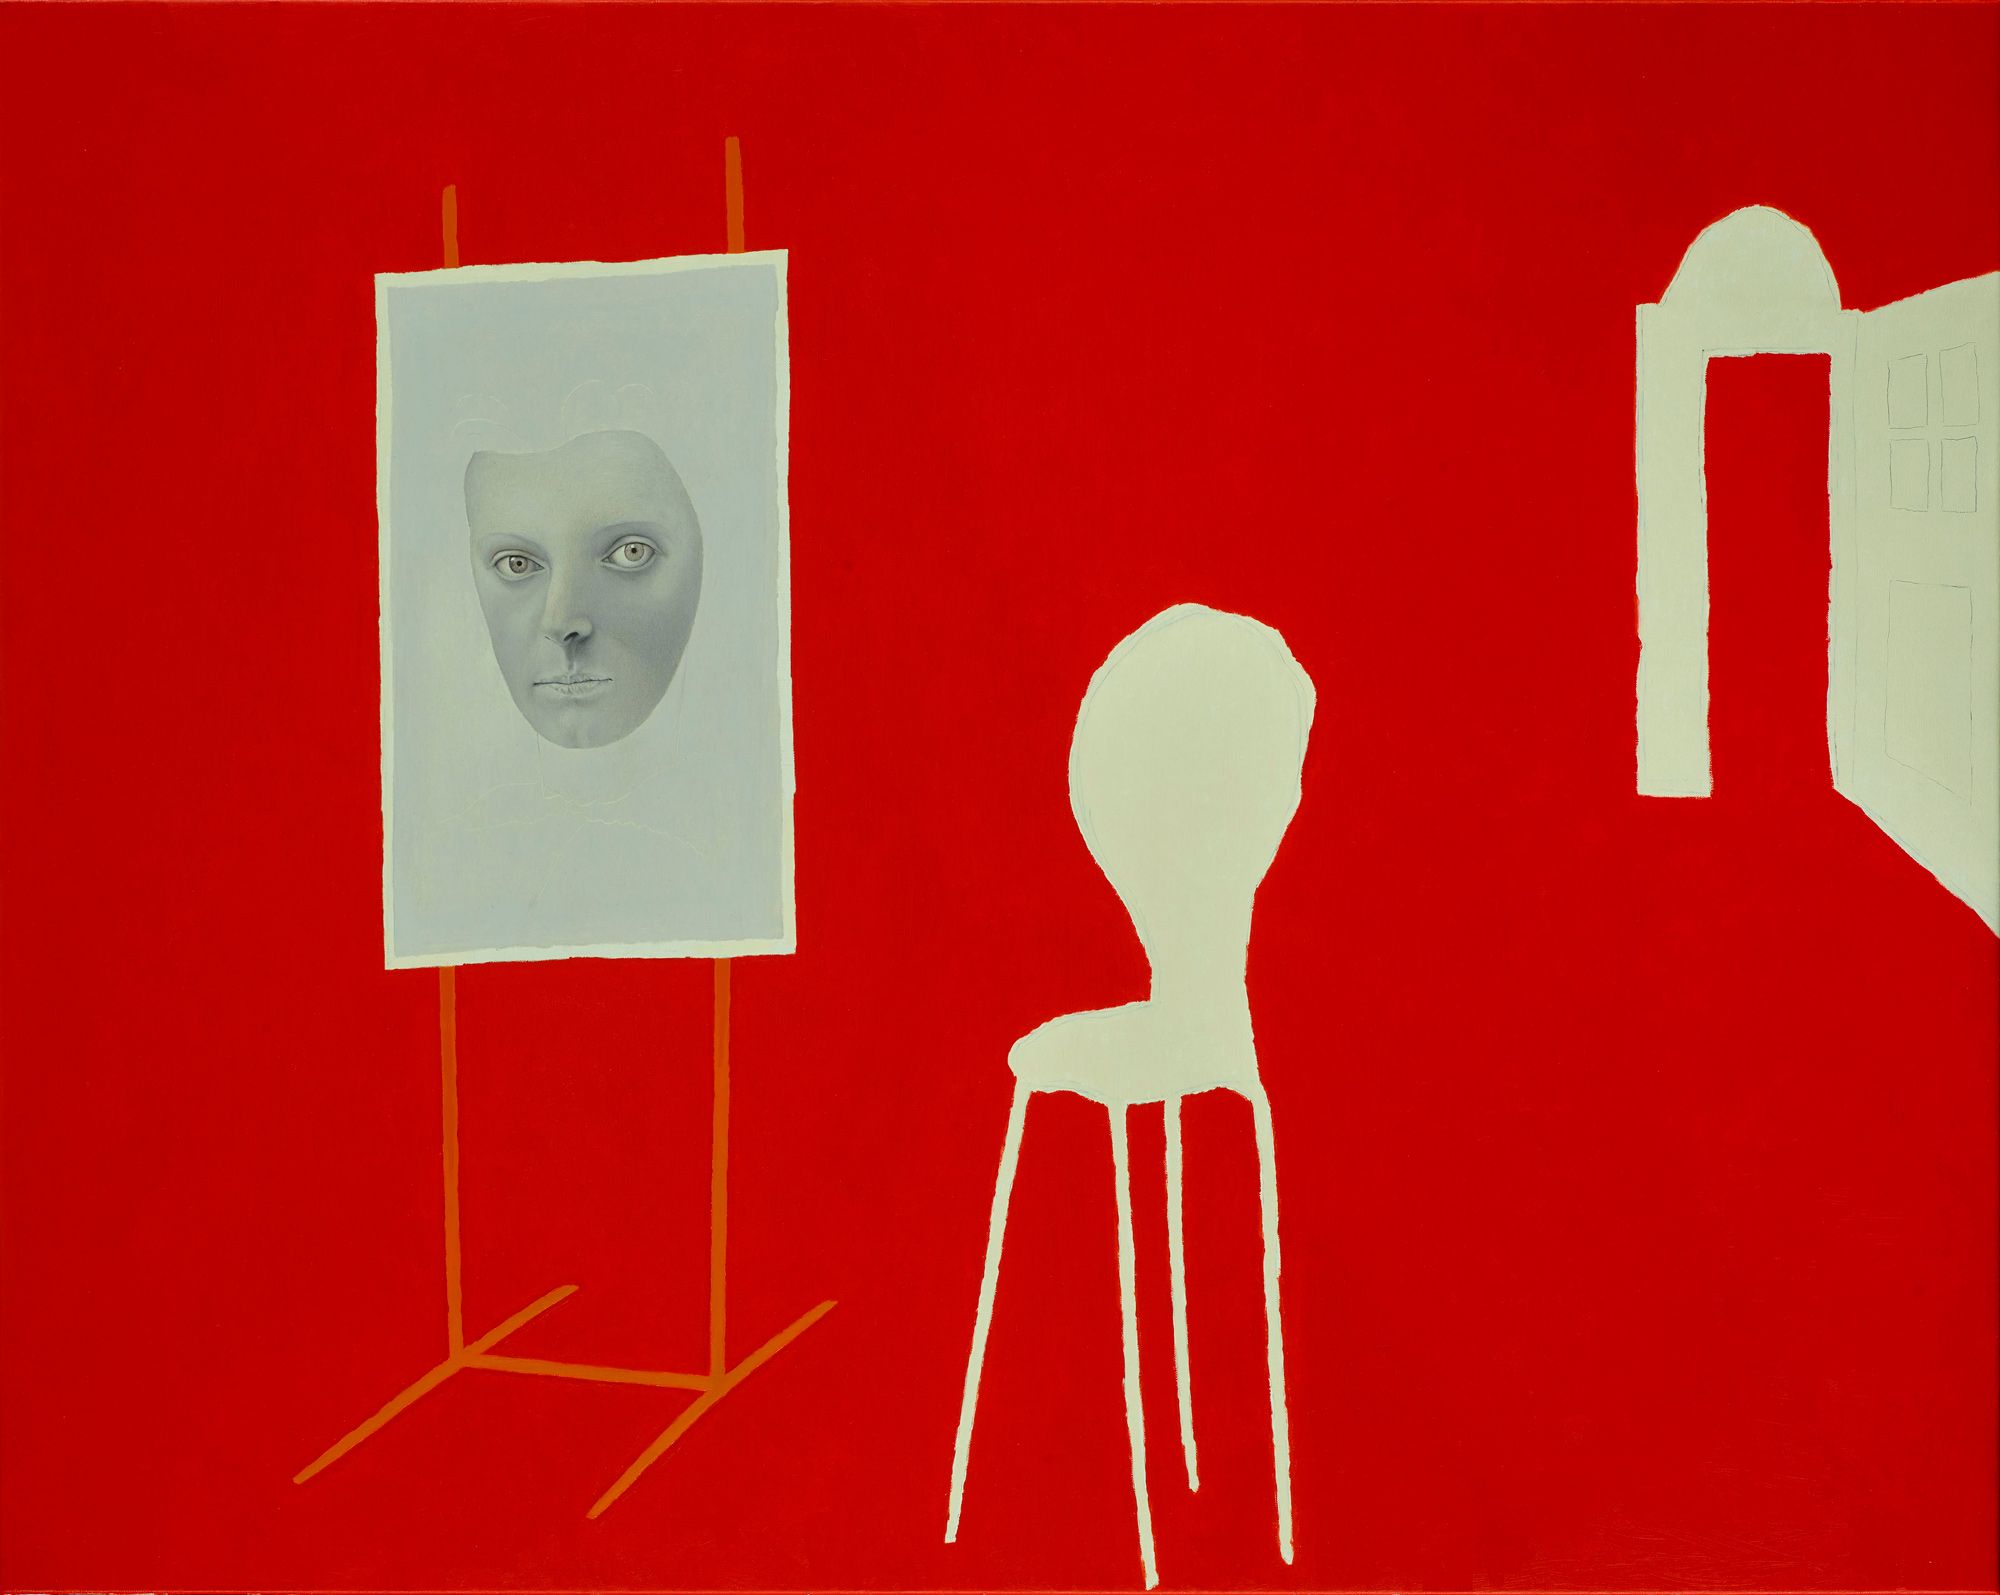 Mark Alexander's oil on canvas: striking red backdrop with a pale monochrome face portrait and abstract forms.